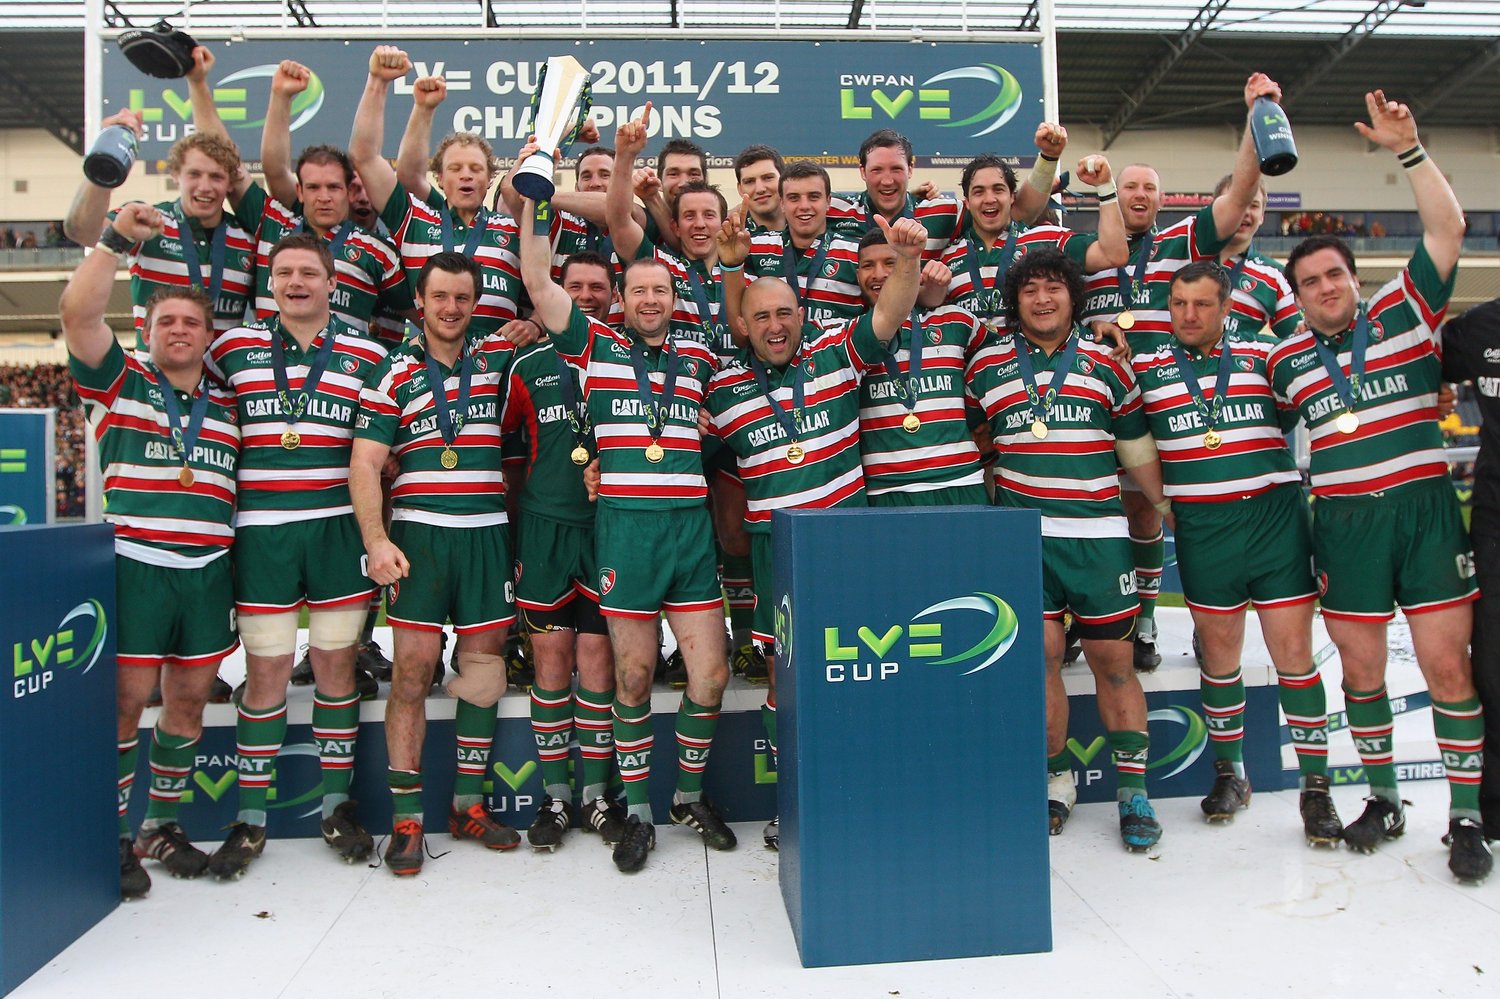 Tigers triumph in the 06/07 and 11/12 Anglo-Welsh Cup finals